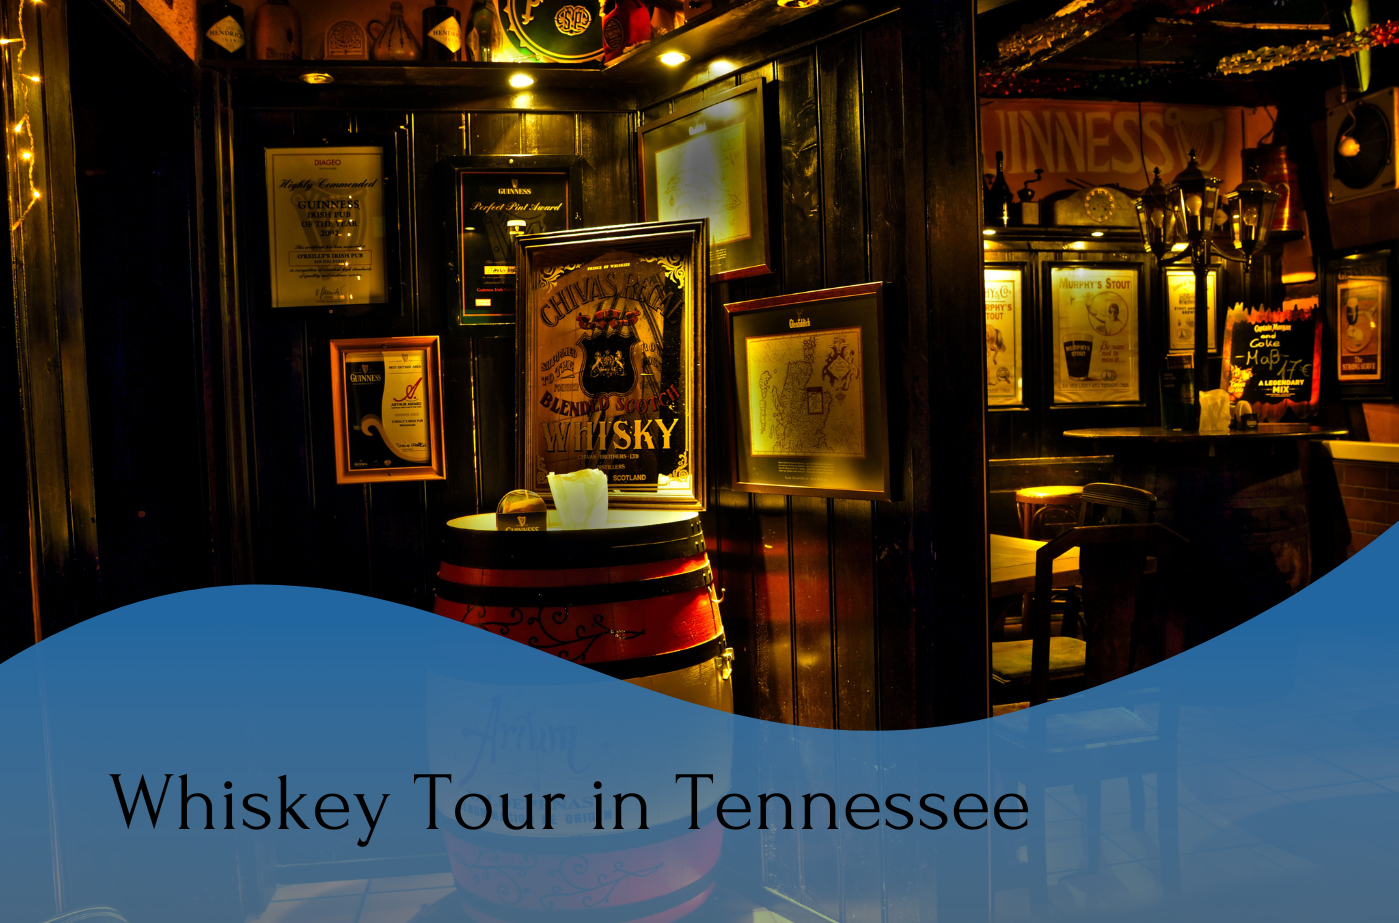 A cozy bar scene with whiskey-themed decor and a written text of " whiskey tour in tennessee".